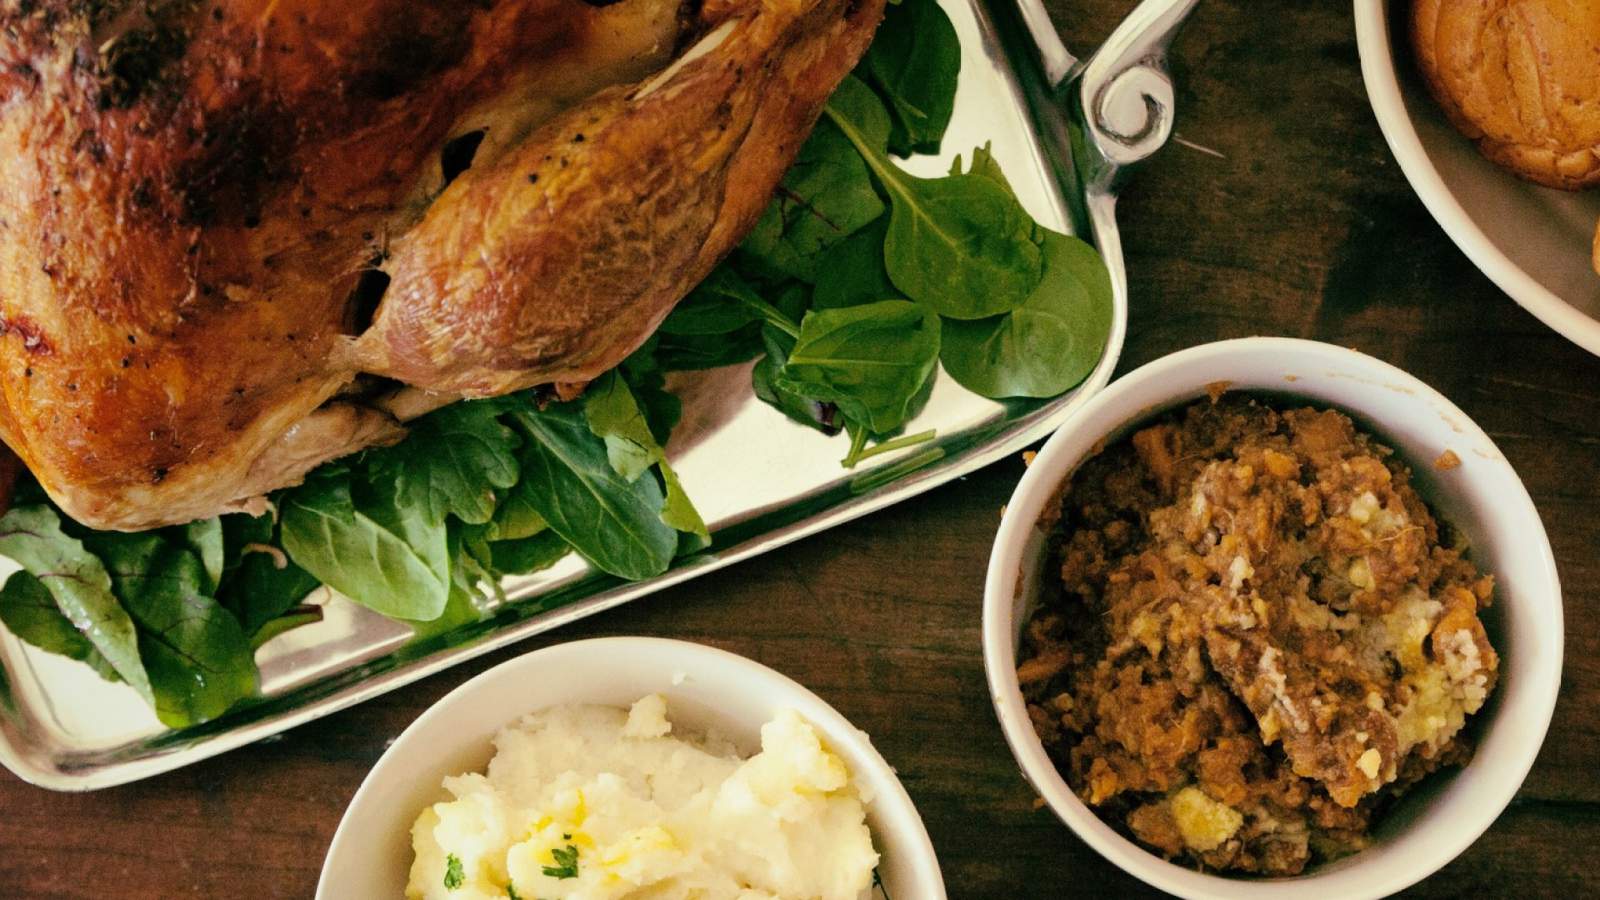 A local restaurant wants to cook for you this Thanksgiving!